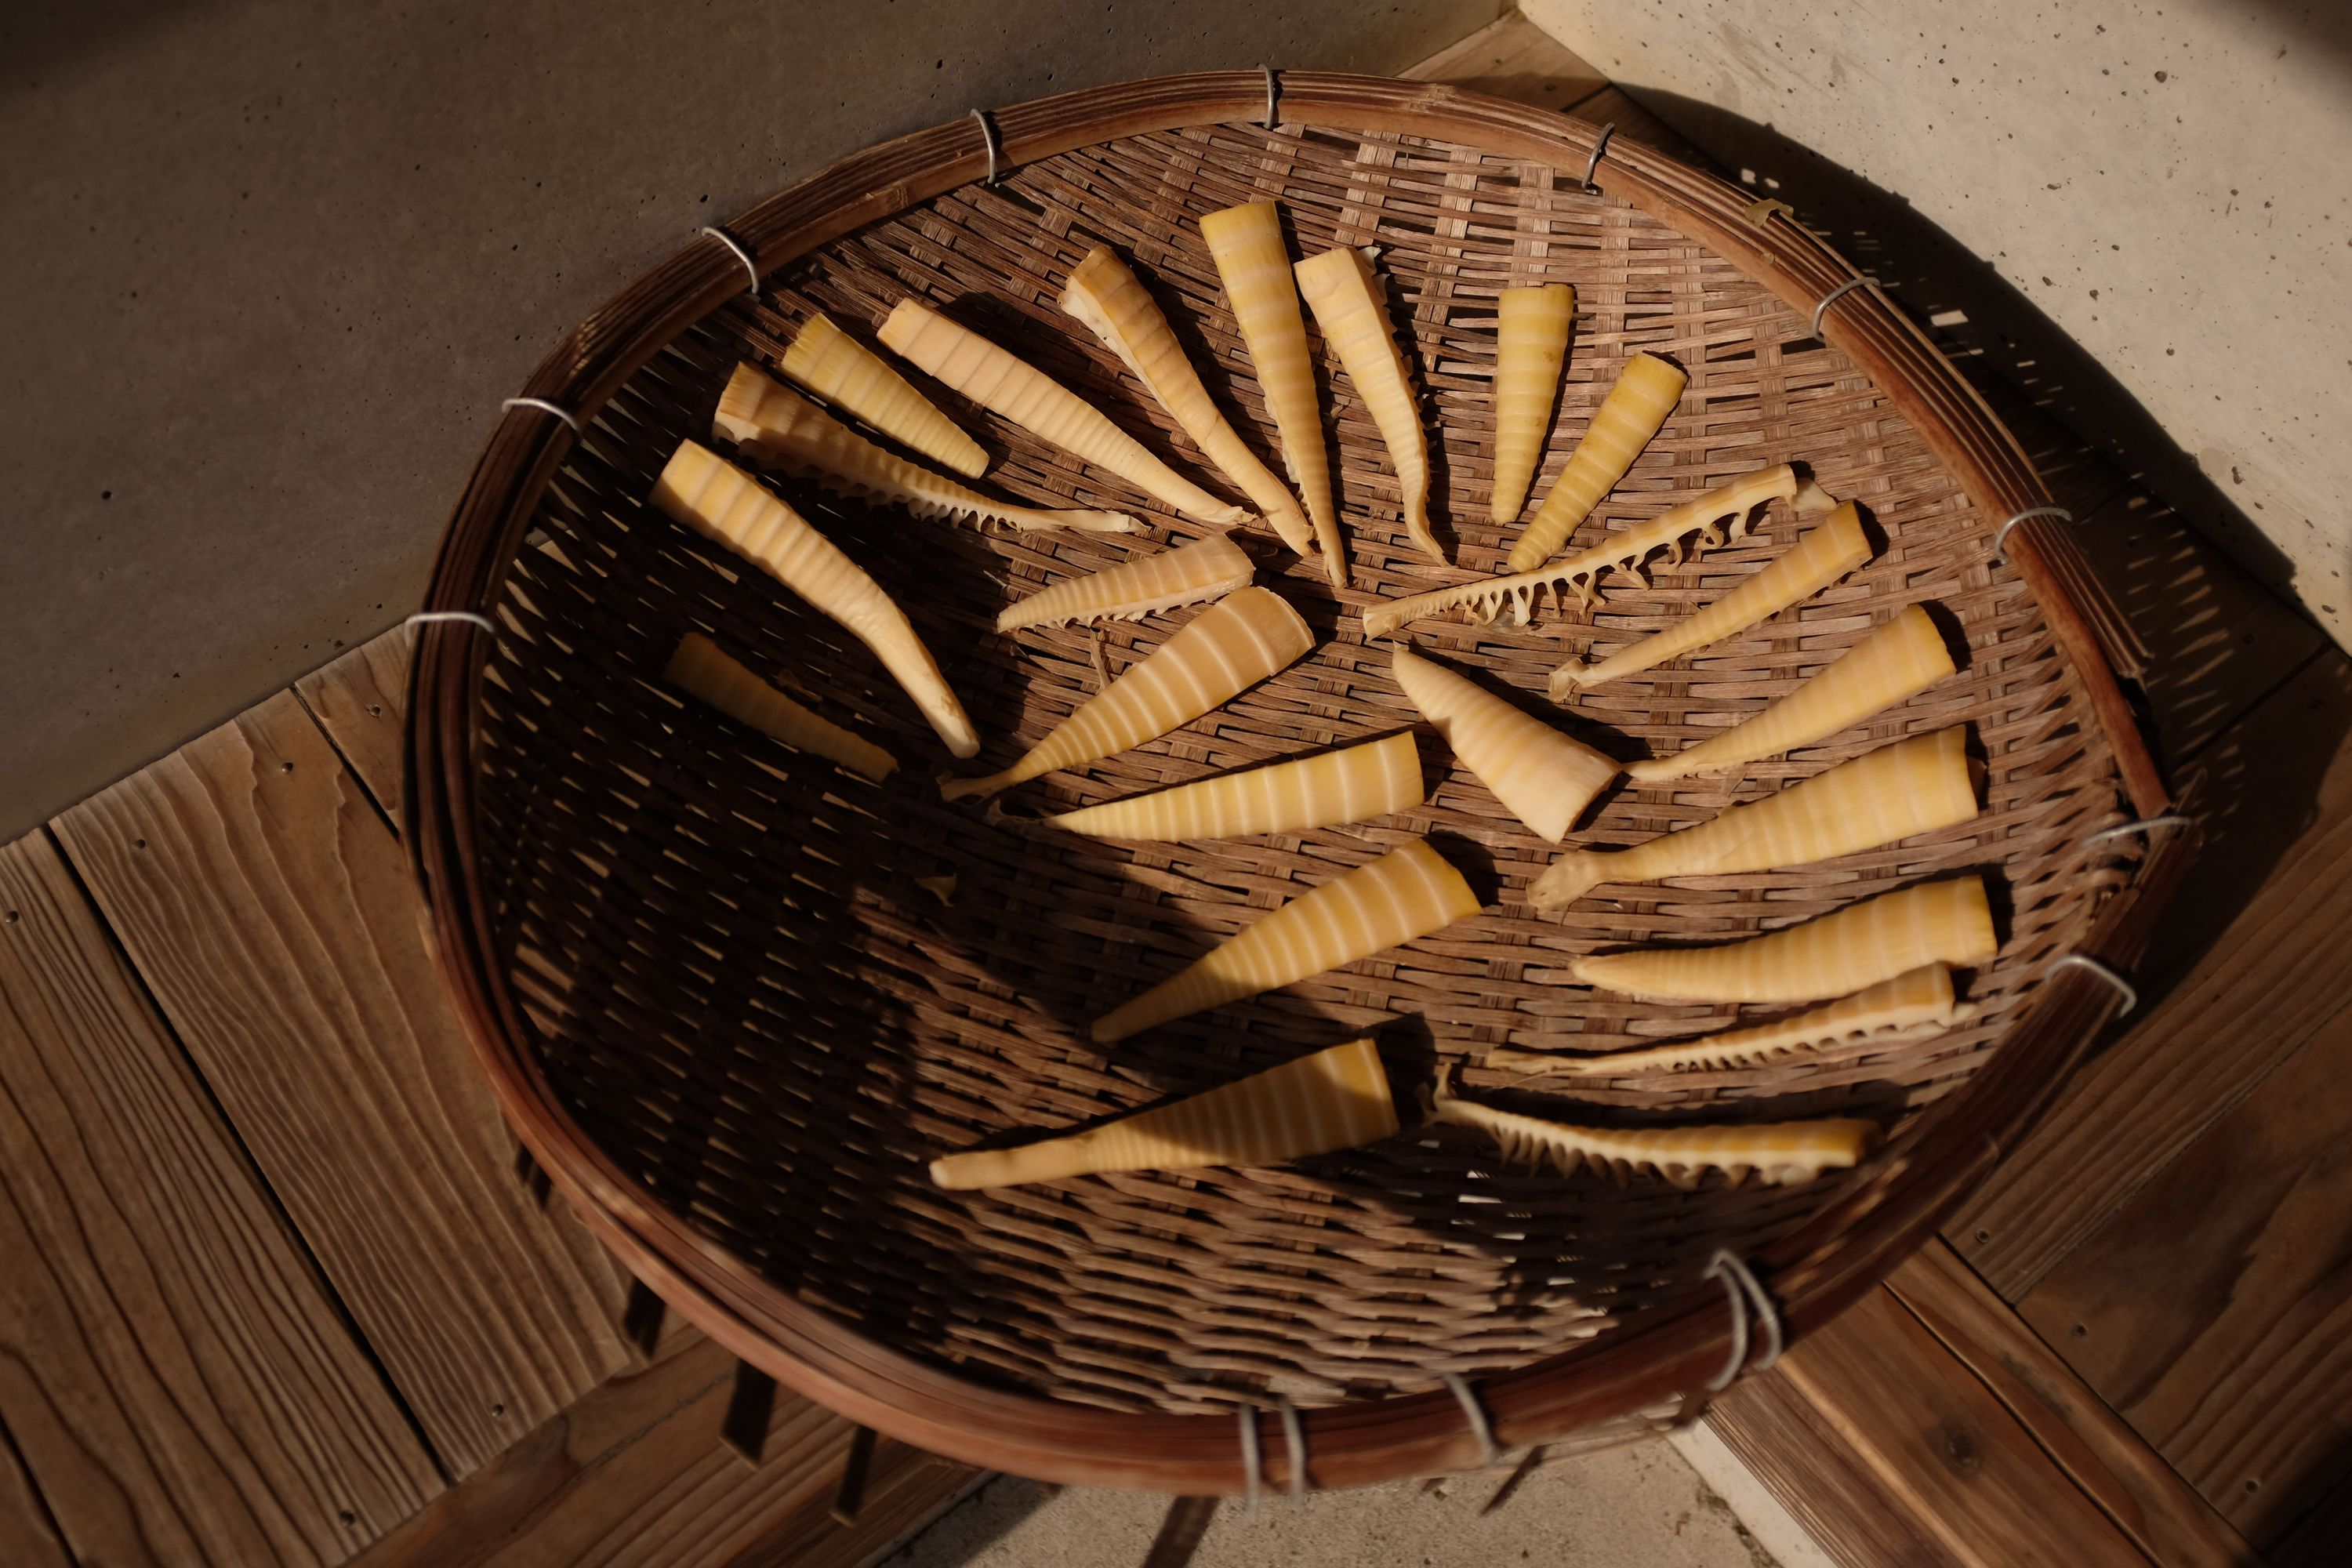 Bamboo shoots drying in a round basket in the afternoon light.